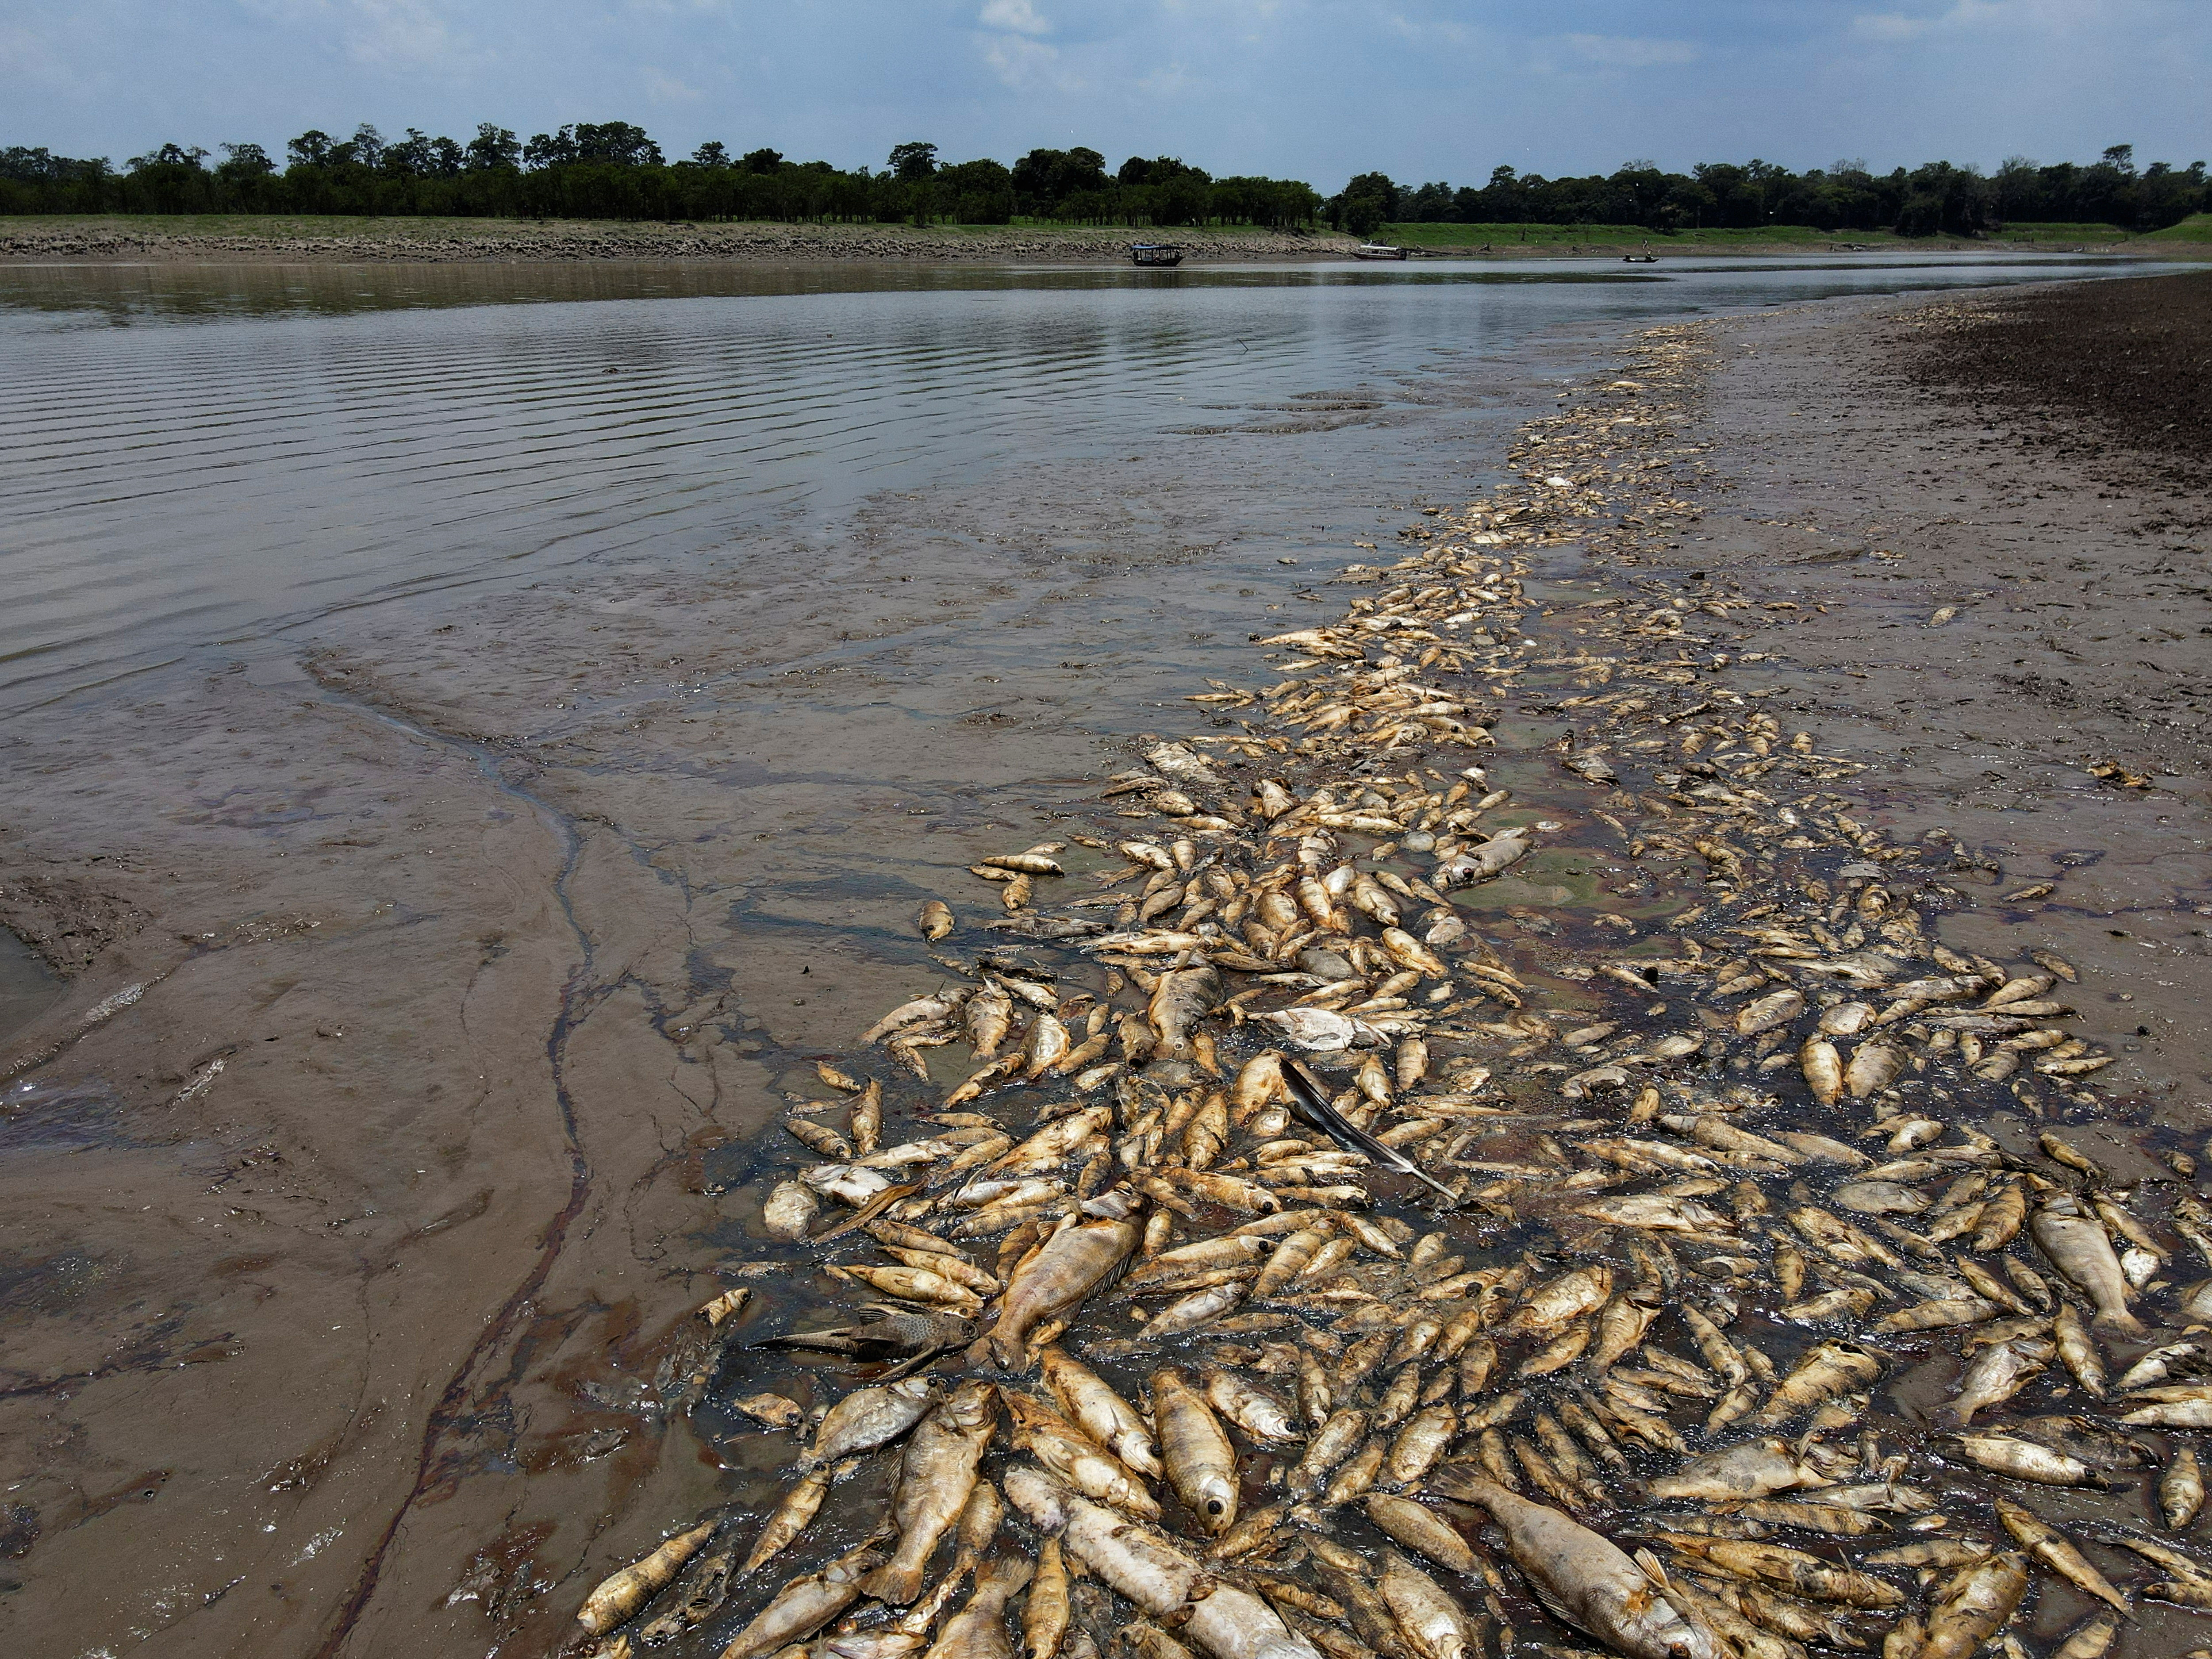 Dead fish are seen at Piranha lake, which has been affected by the drought of the Solimoes River, in Manacapuru